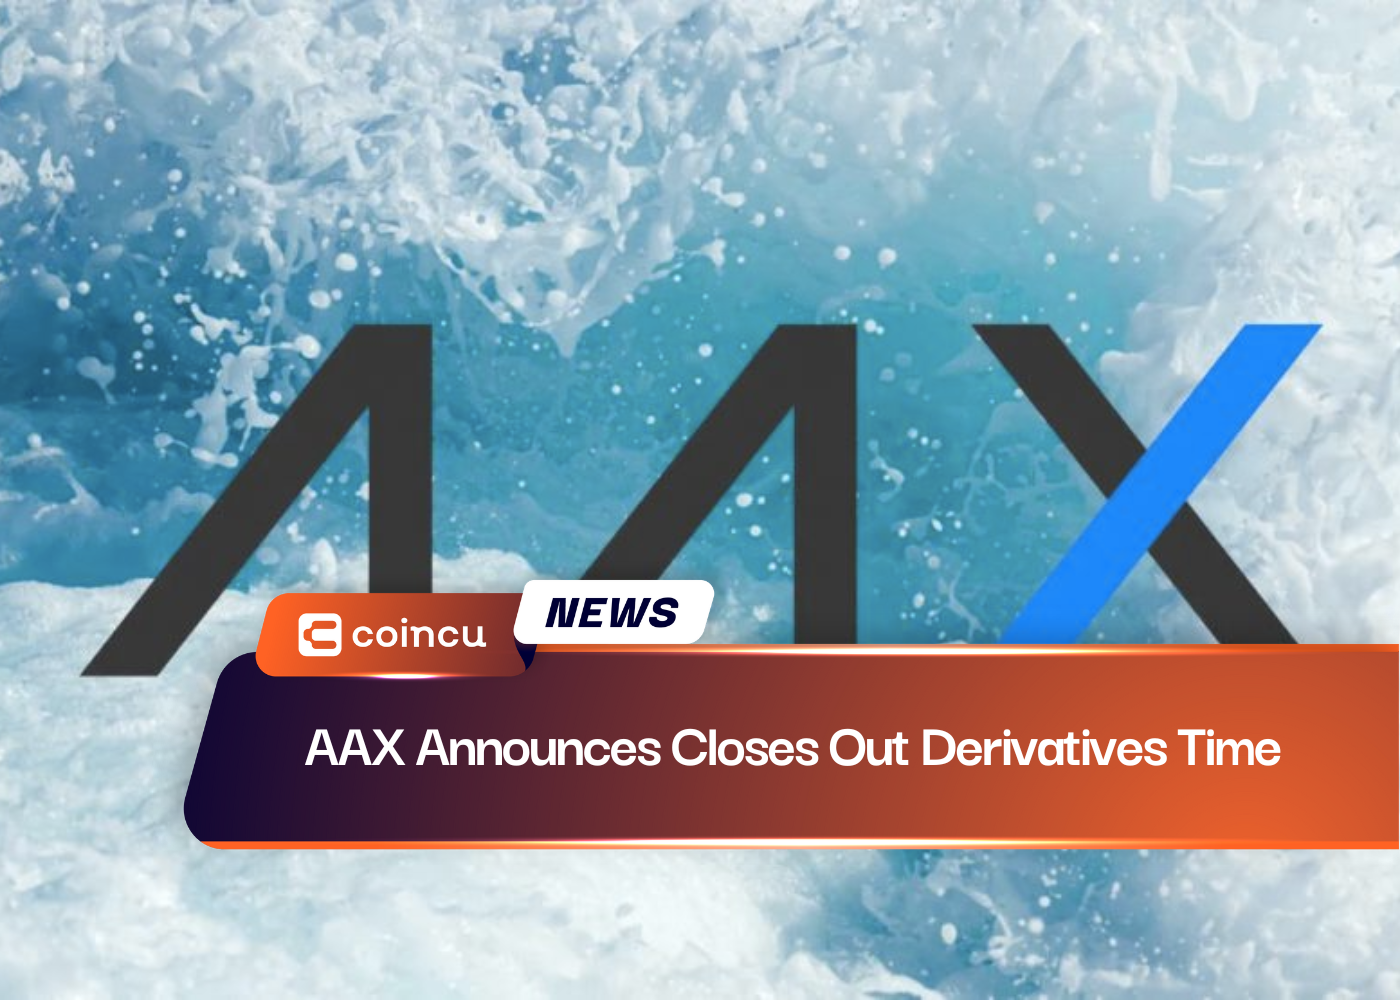 AAX Announces Closes Out Derivatives Time